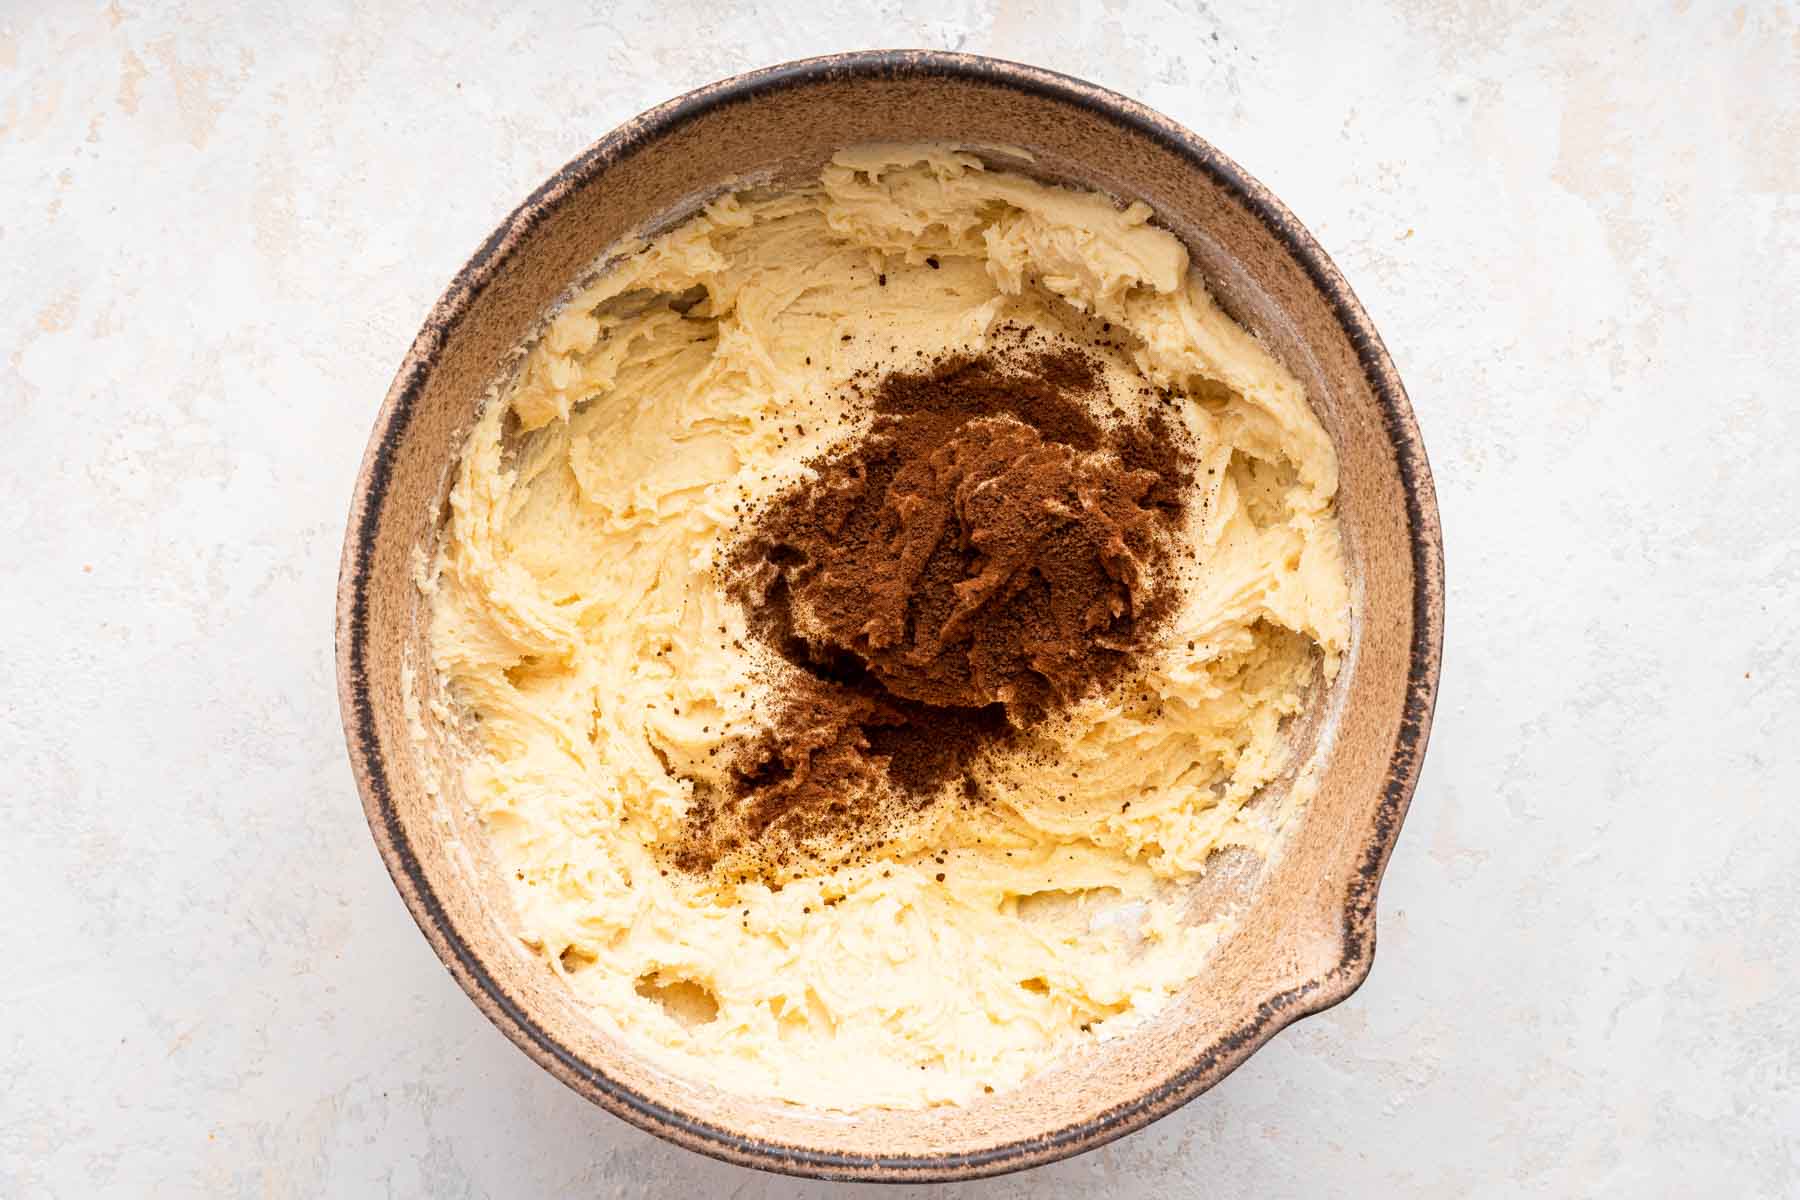 Yellow dough in brown bowl with espresso powder on top.